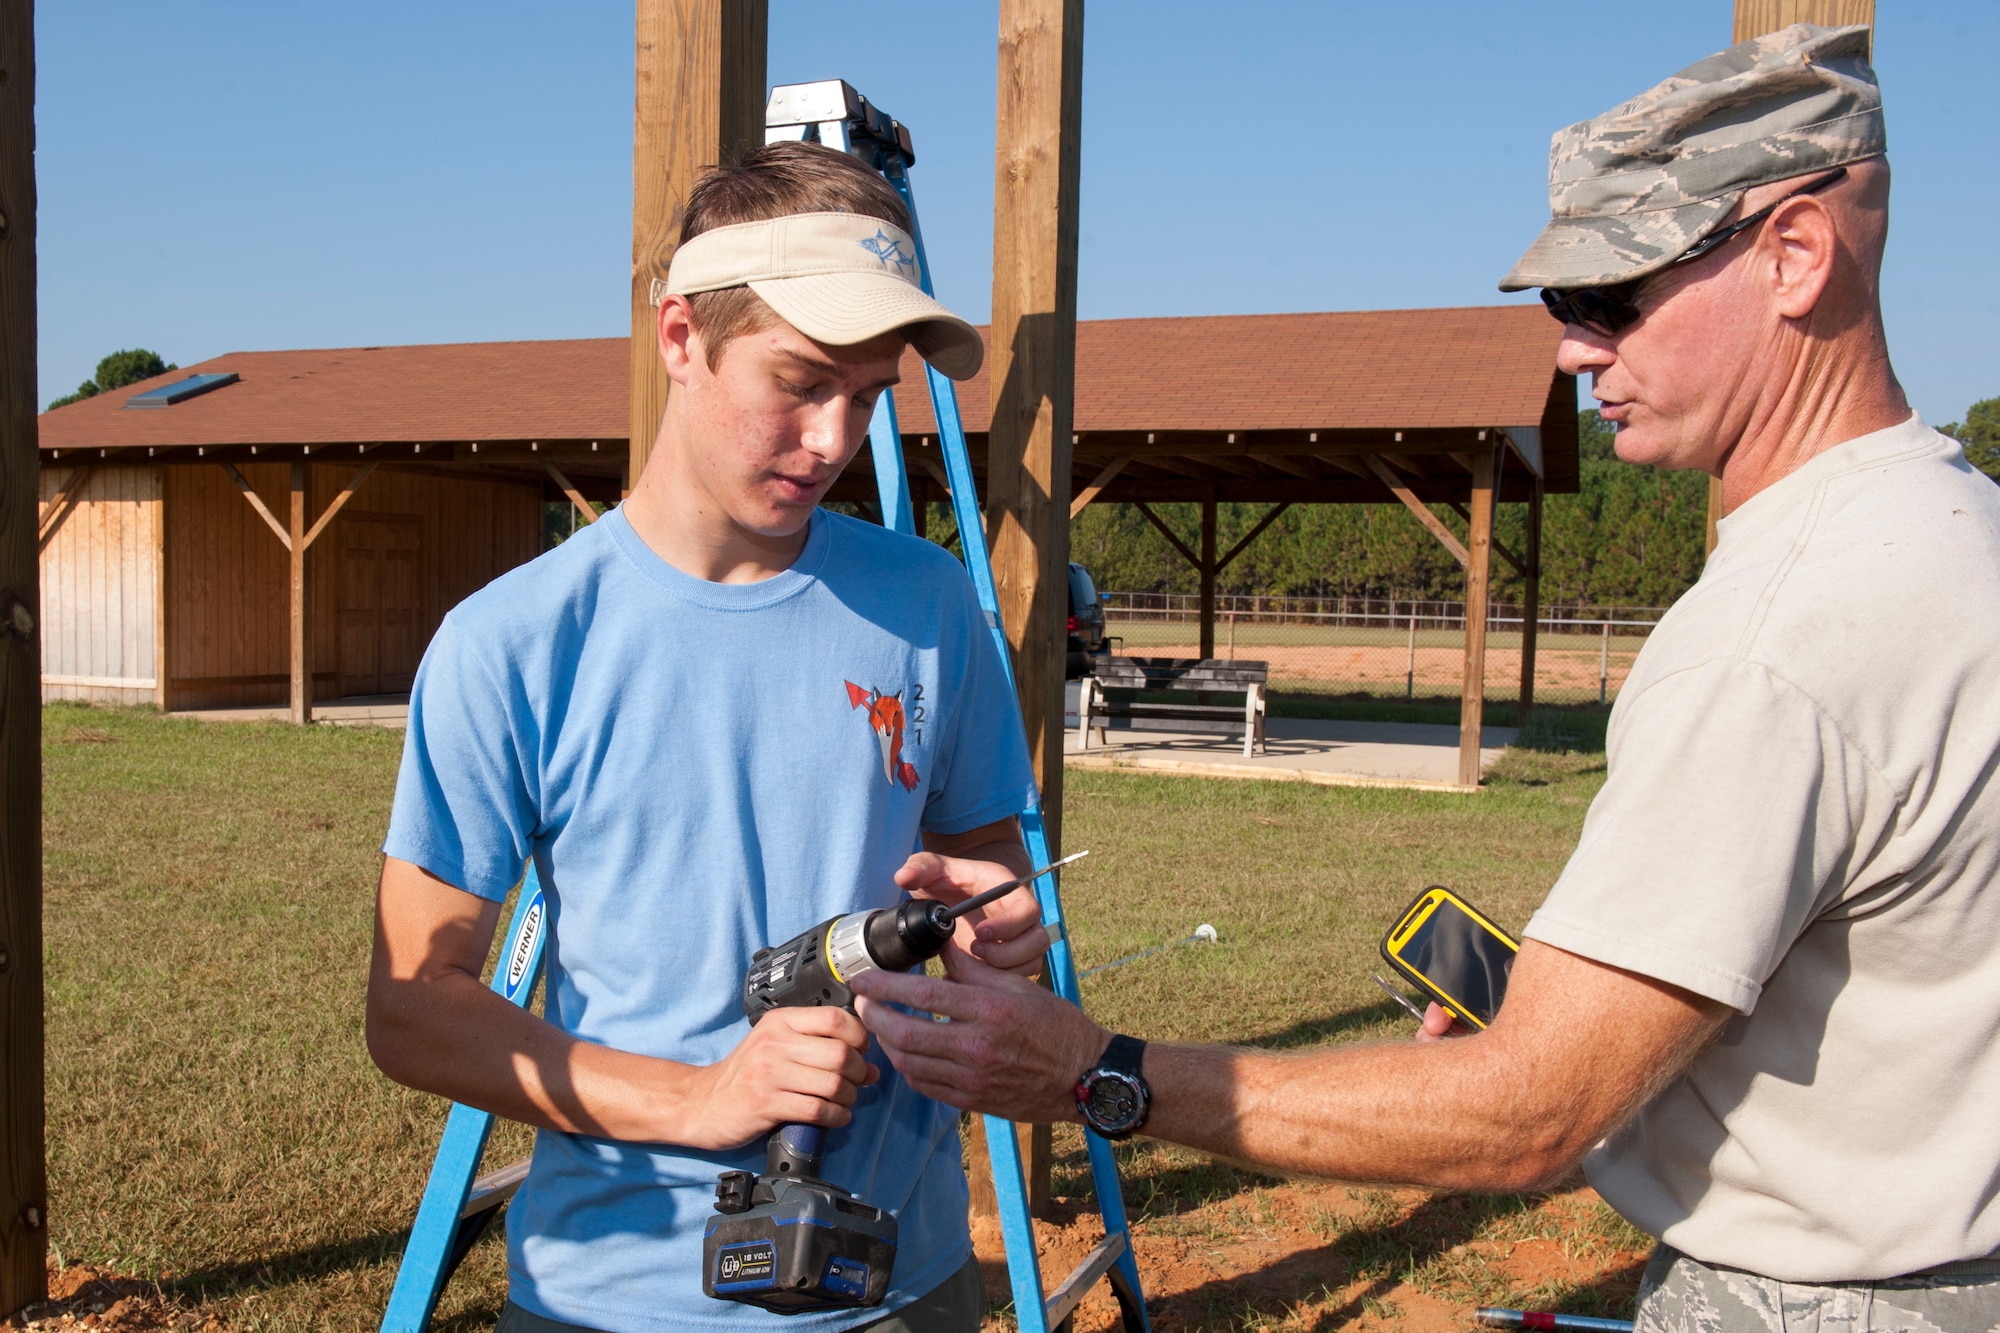 Boy Scouts with Troop 95 from Irmo, S.C., build pull-up bars at McEntire Joint National Guard Base, S.C., as part of their Eagle Scout project with help of the 169th Civil Engineer Squadron, Oct. 5, 2013.  The project is a leadership task and final step before earning Eagle Scout. (U.S. Air National Guard photo by Staff Sgt. Jorge Intriago/Released) 